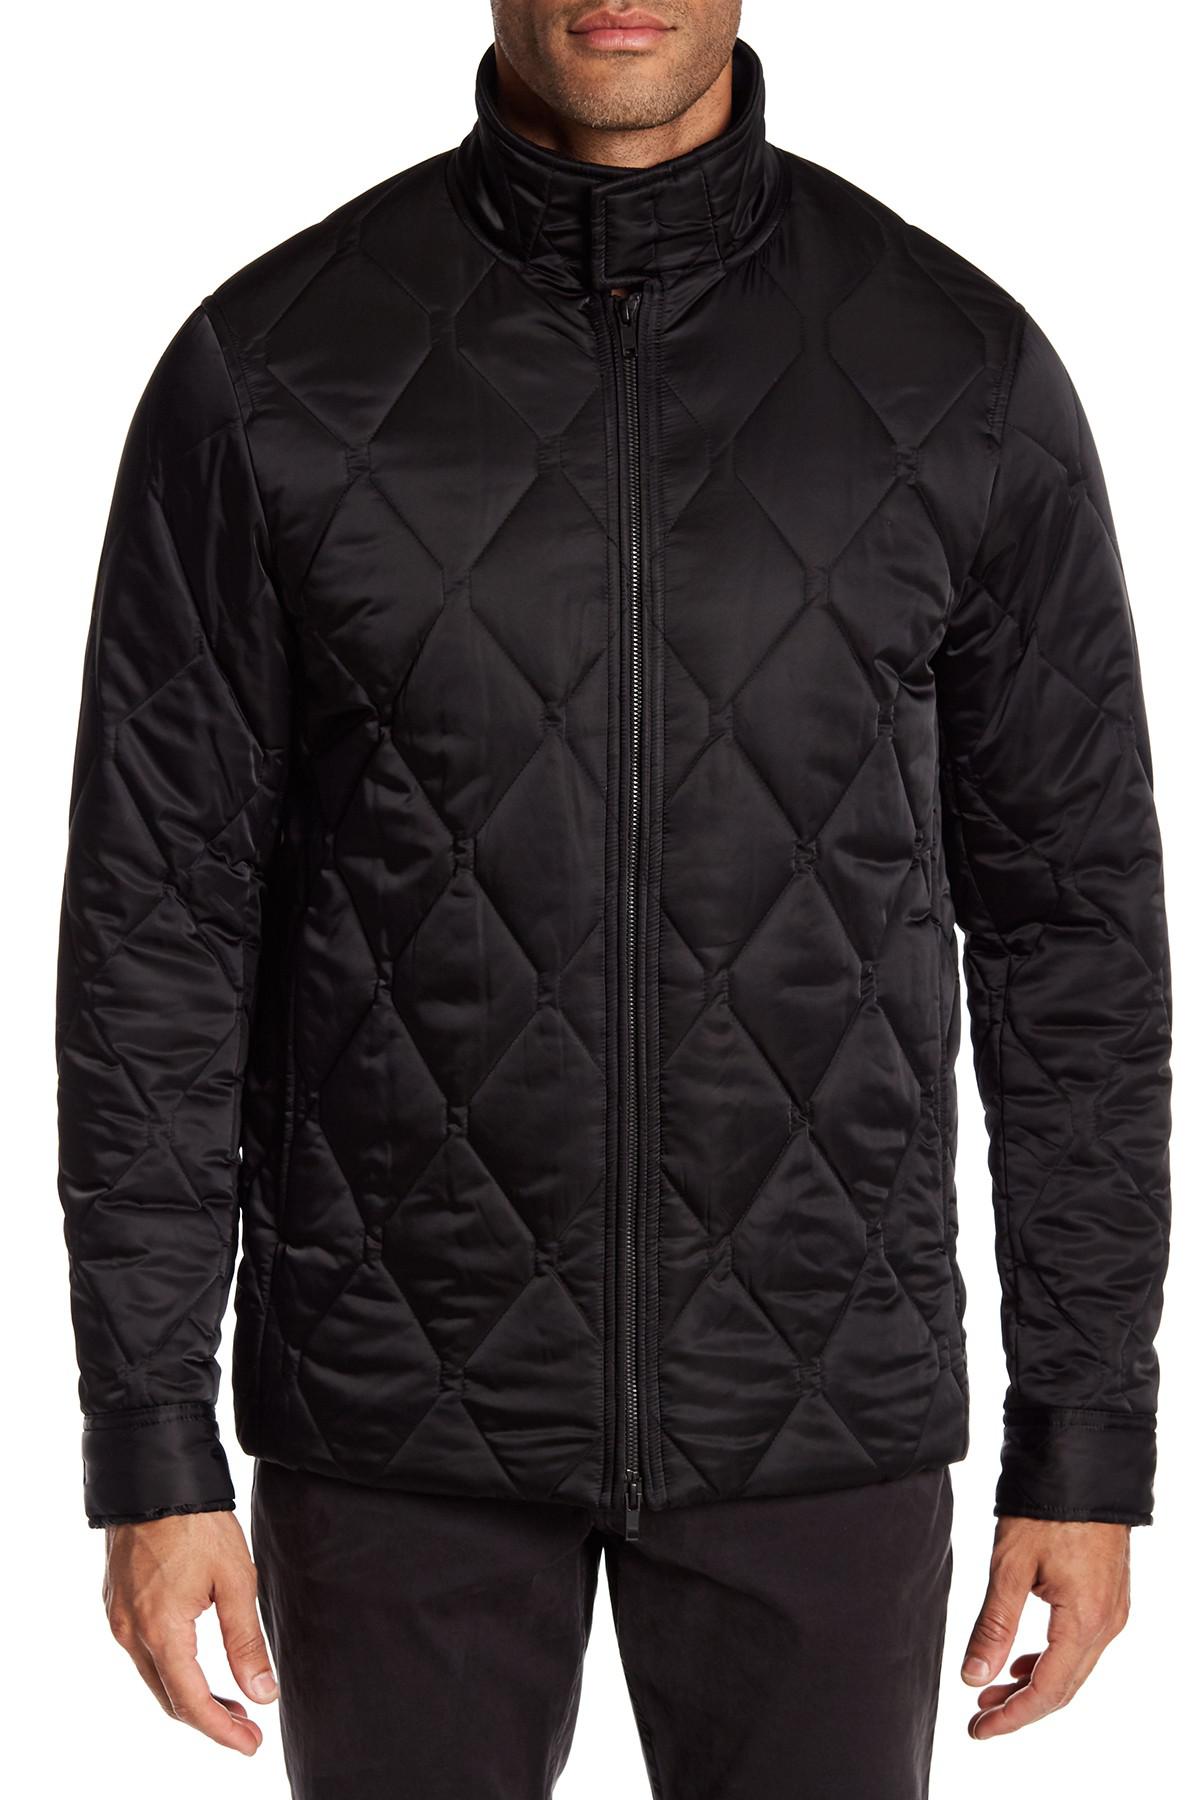 Lyst - Theory Berli-torne Quilted Jacket in Black for Men